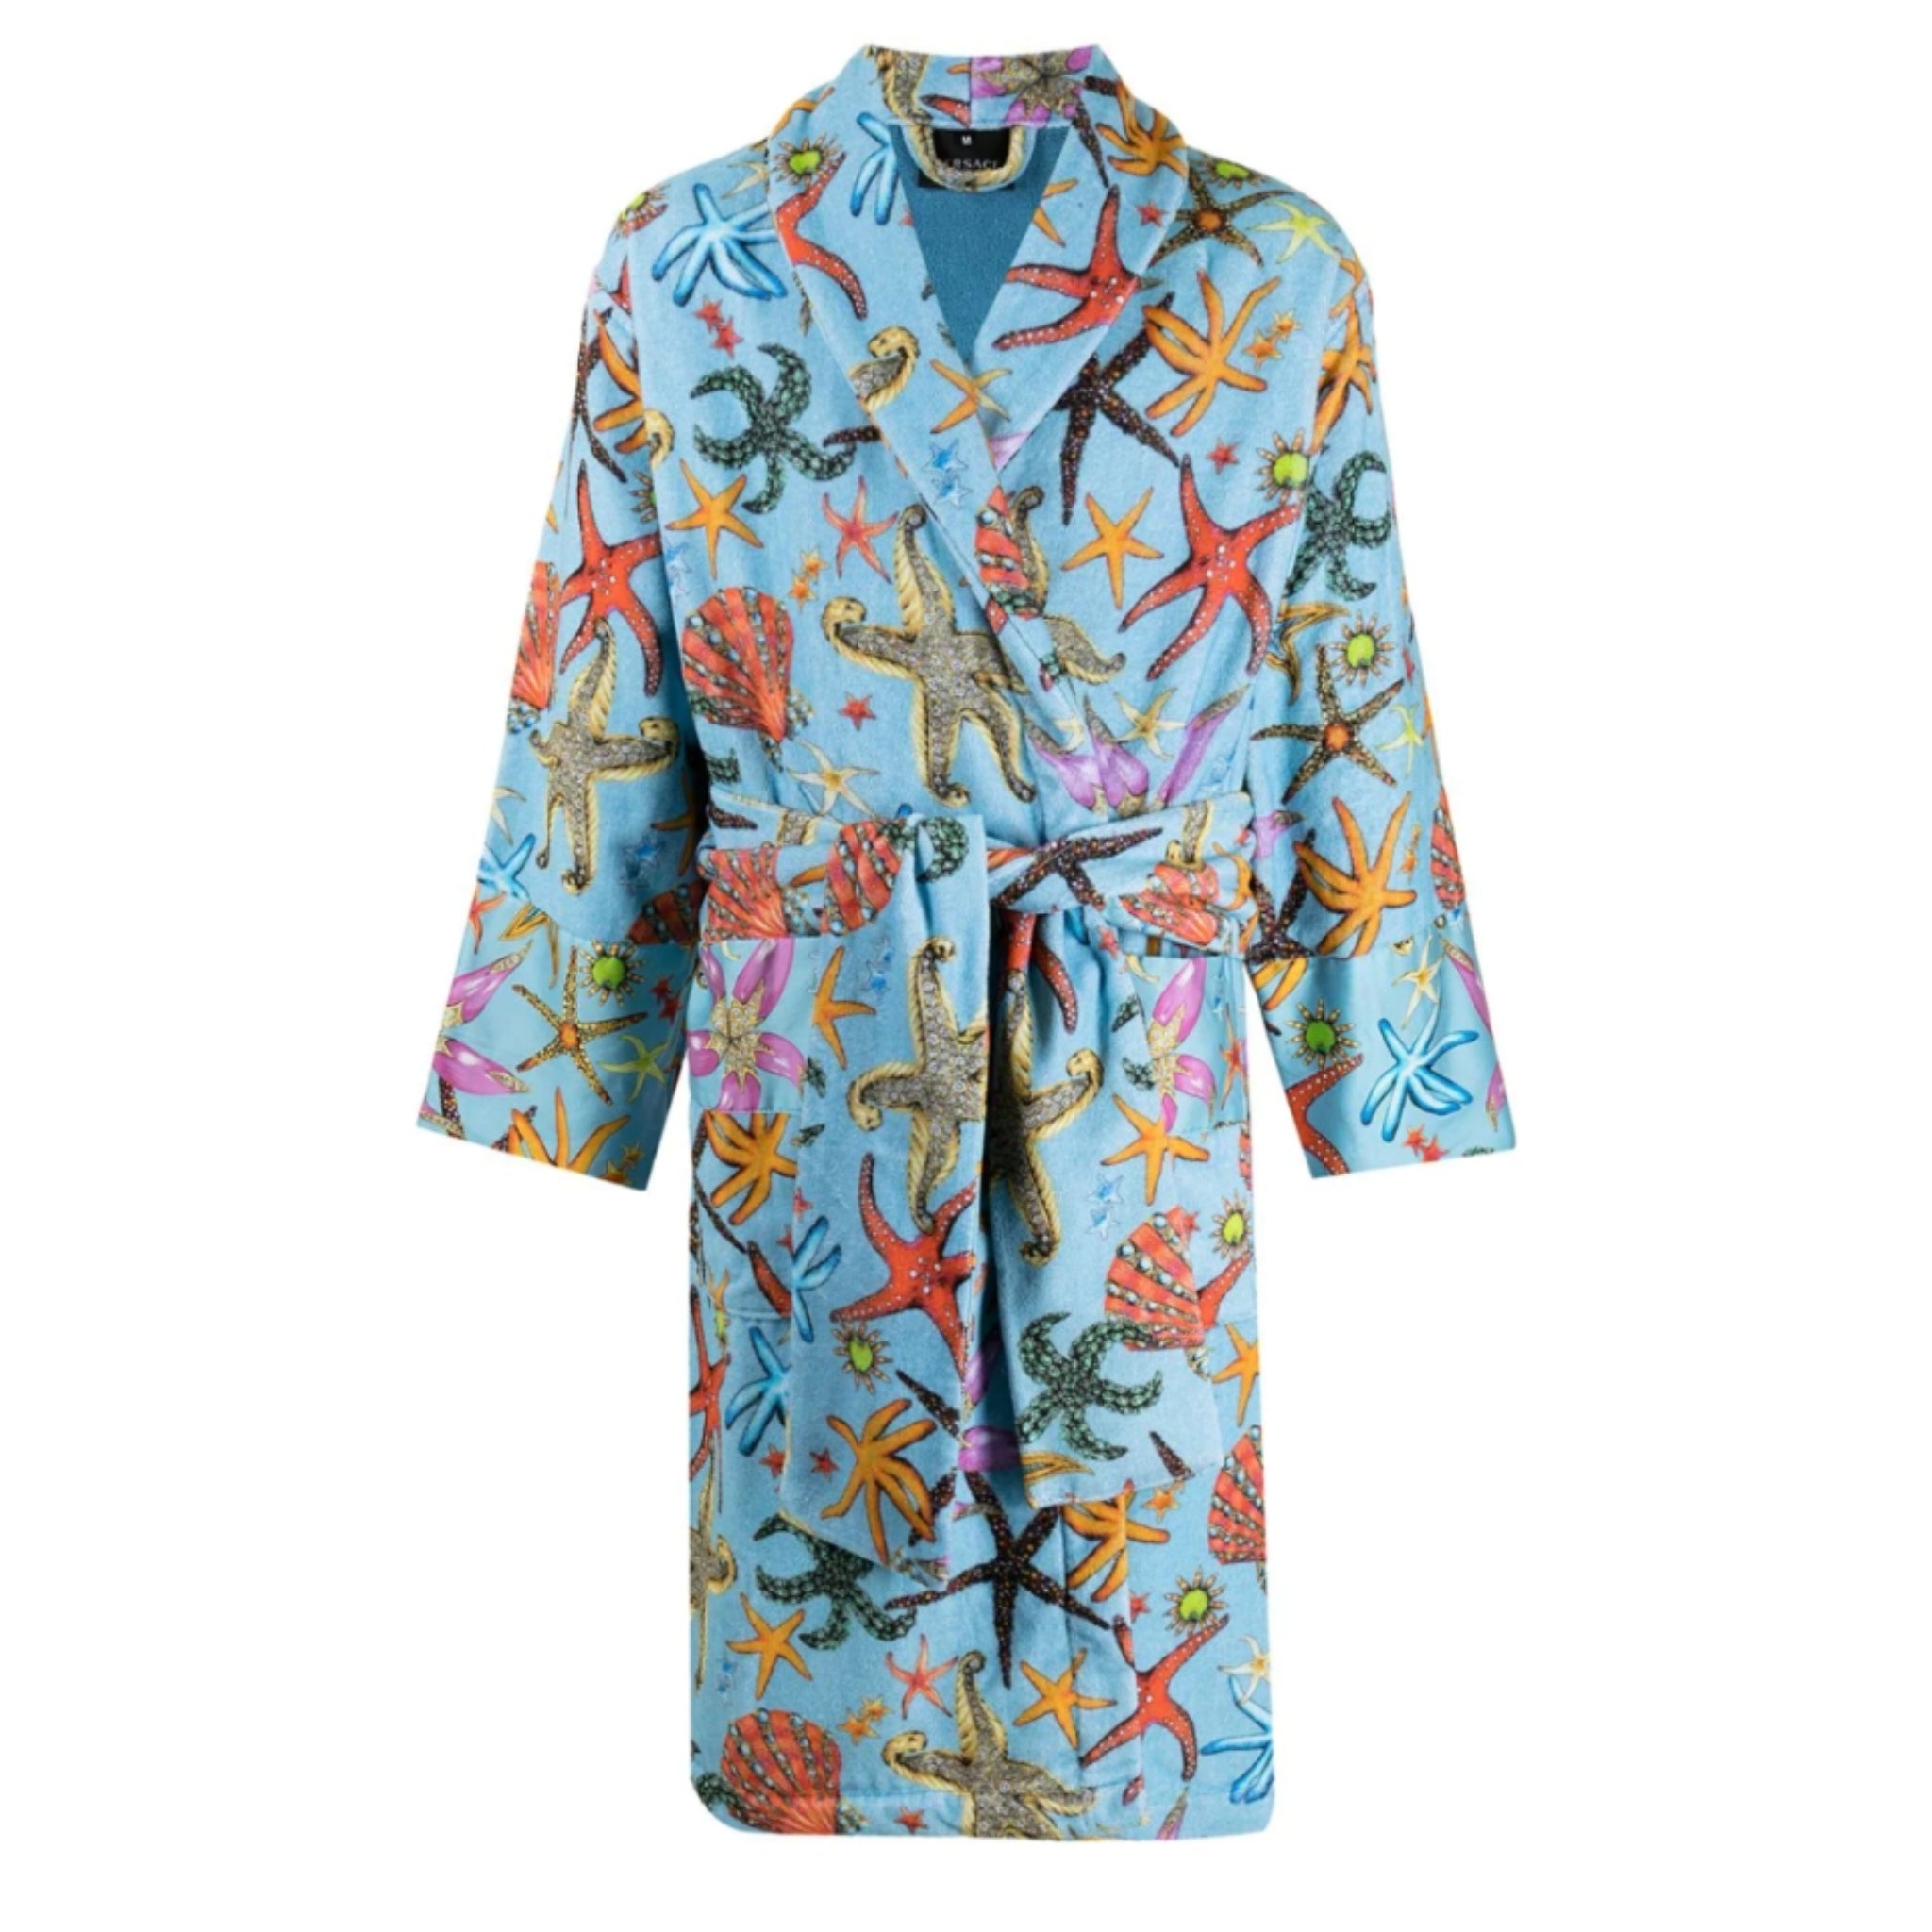 Bath Robe in Jammu - Dealers, Manufacturers & Suppliers -Justdial